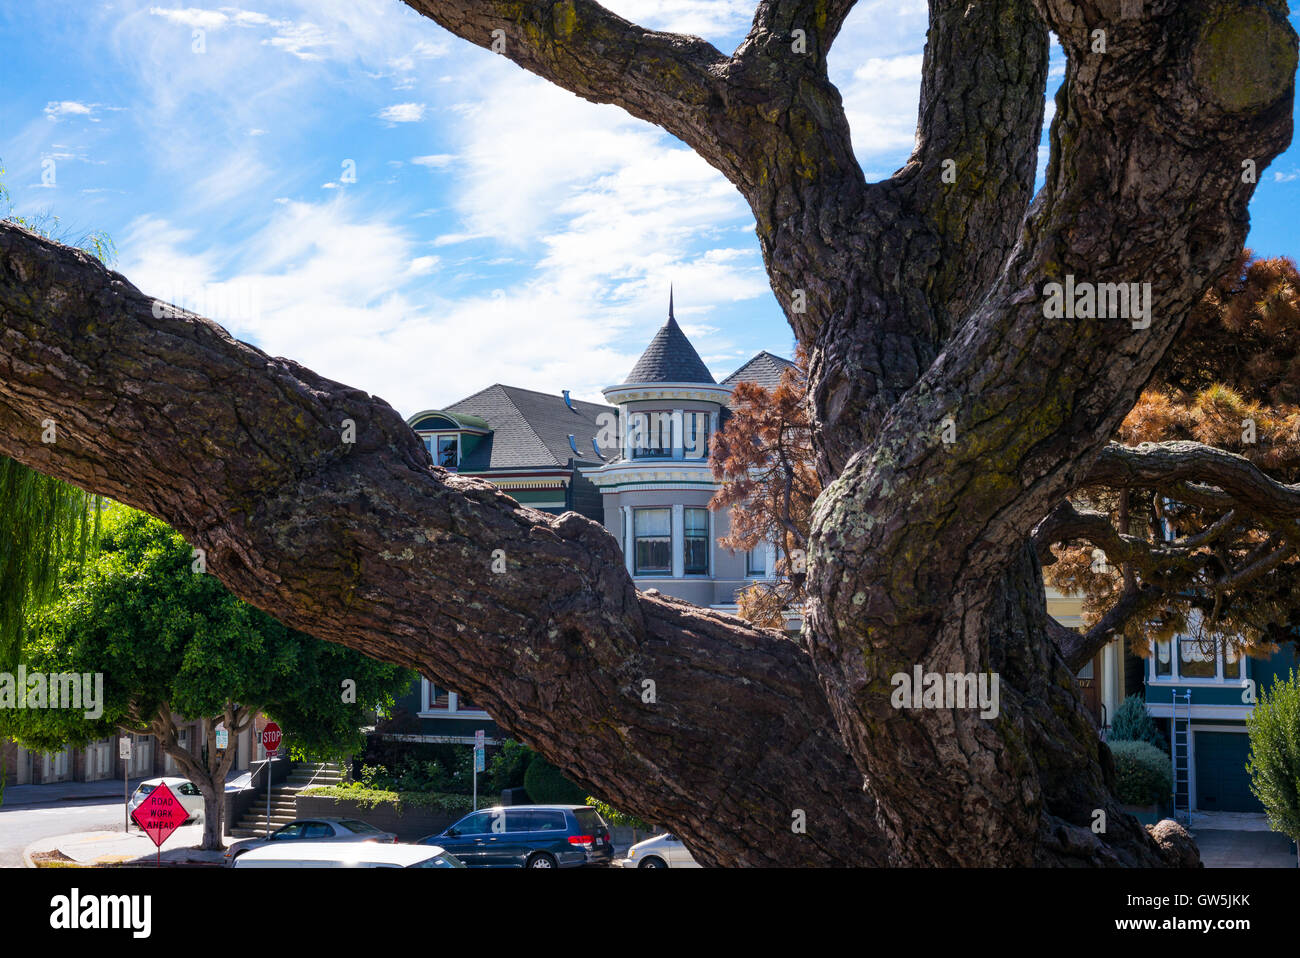 San Francisco, California, the colored traditional houses of Alamo square seen from the park Stock Photo